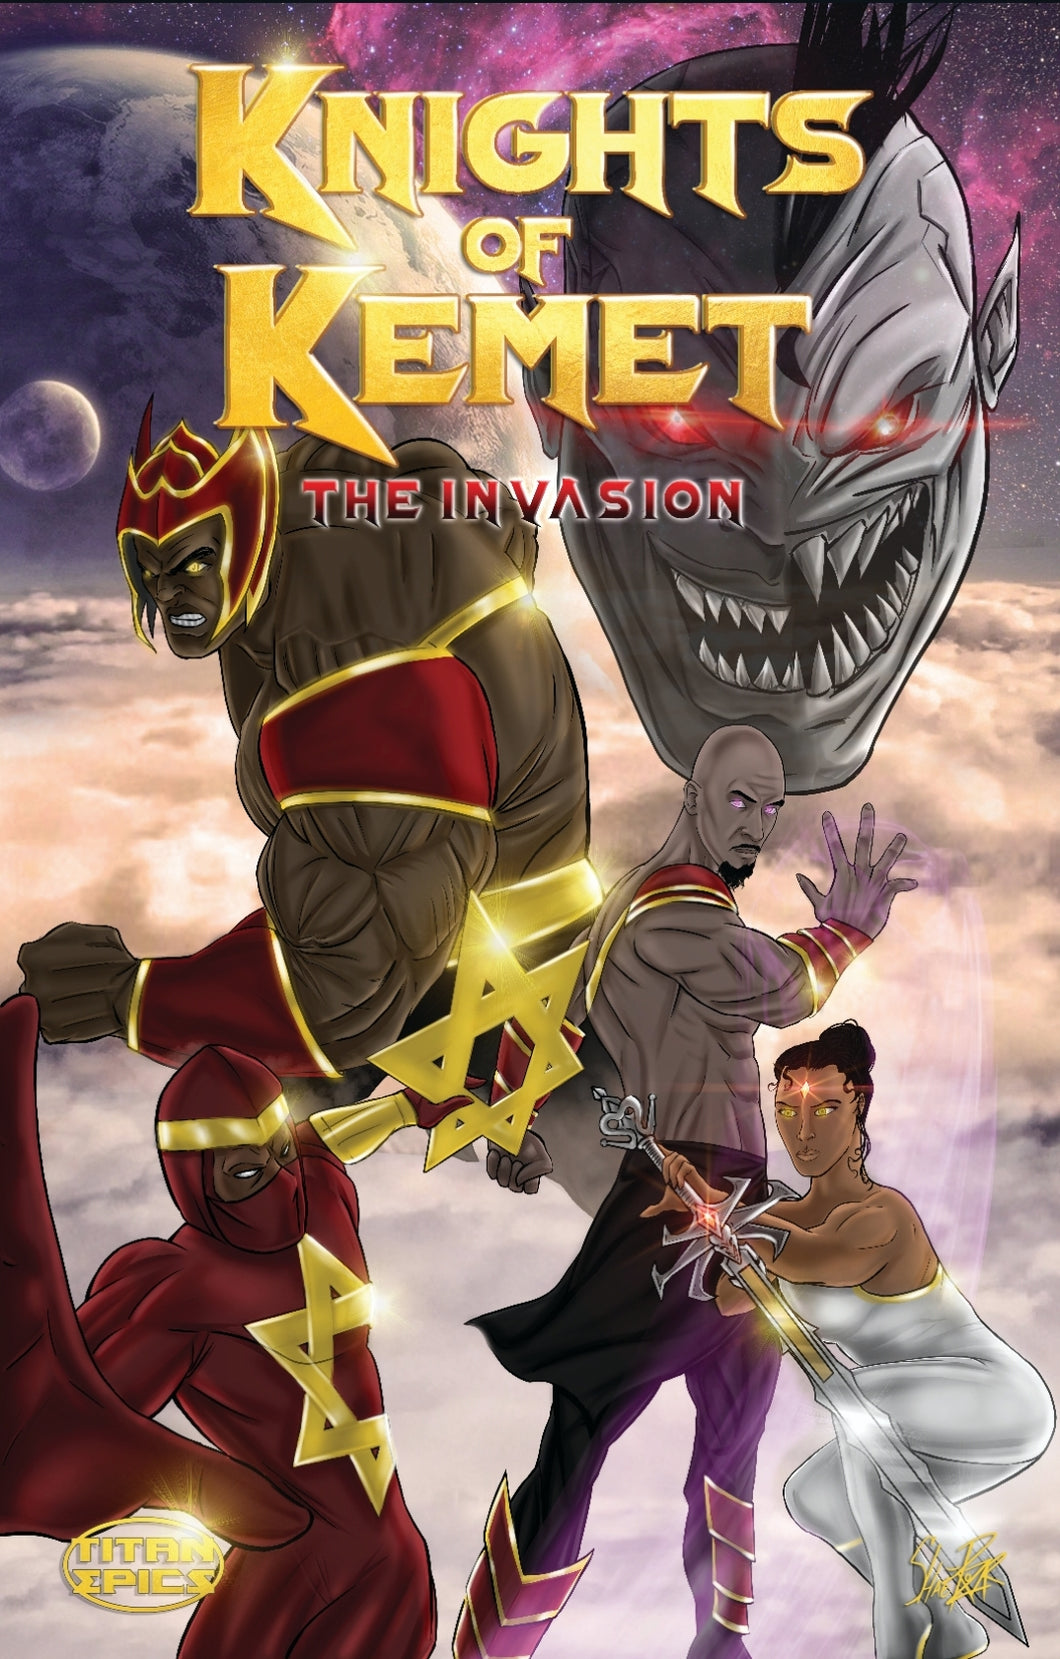 DIGITAL DOWNLOAD - The Knights of Kemet - The Invasion